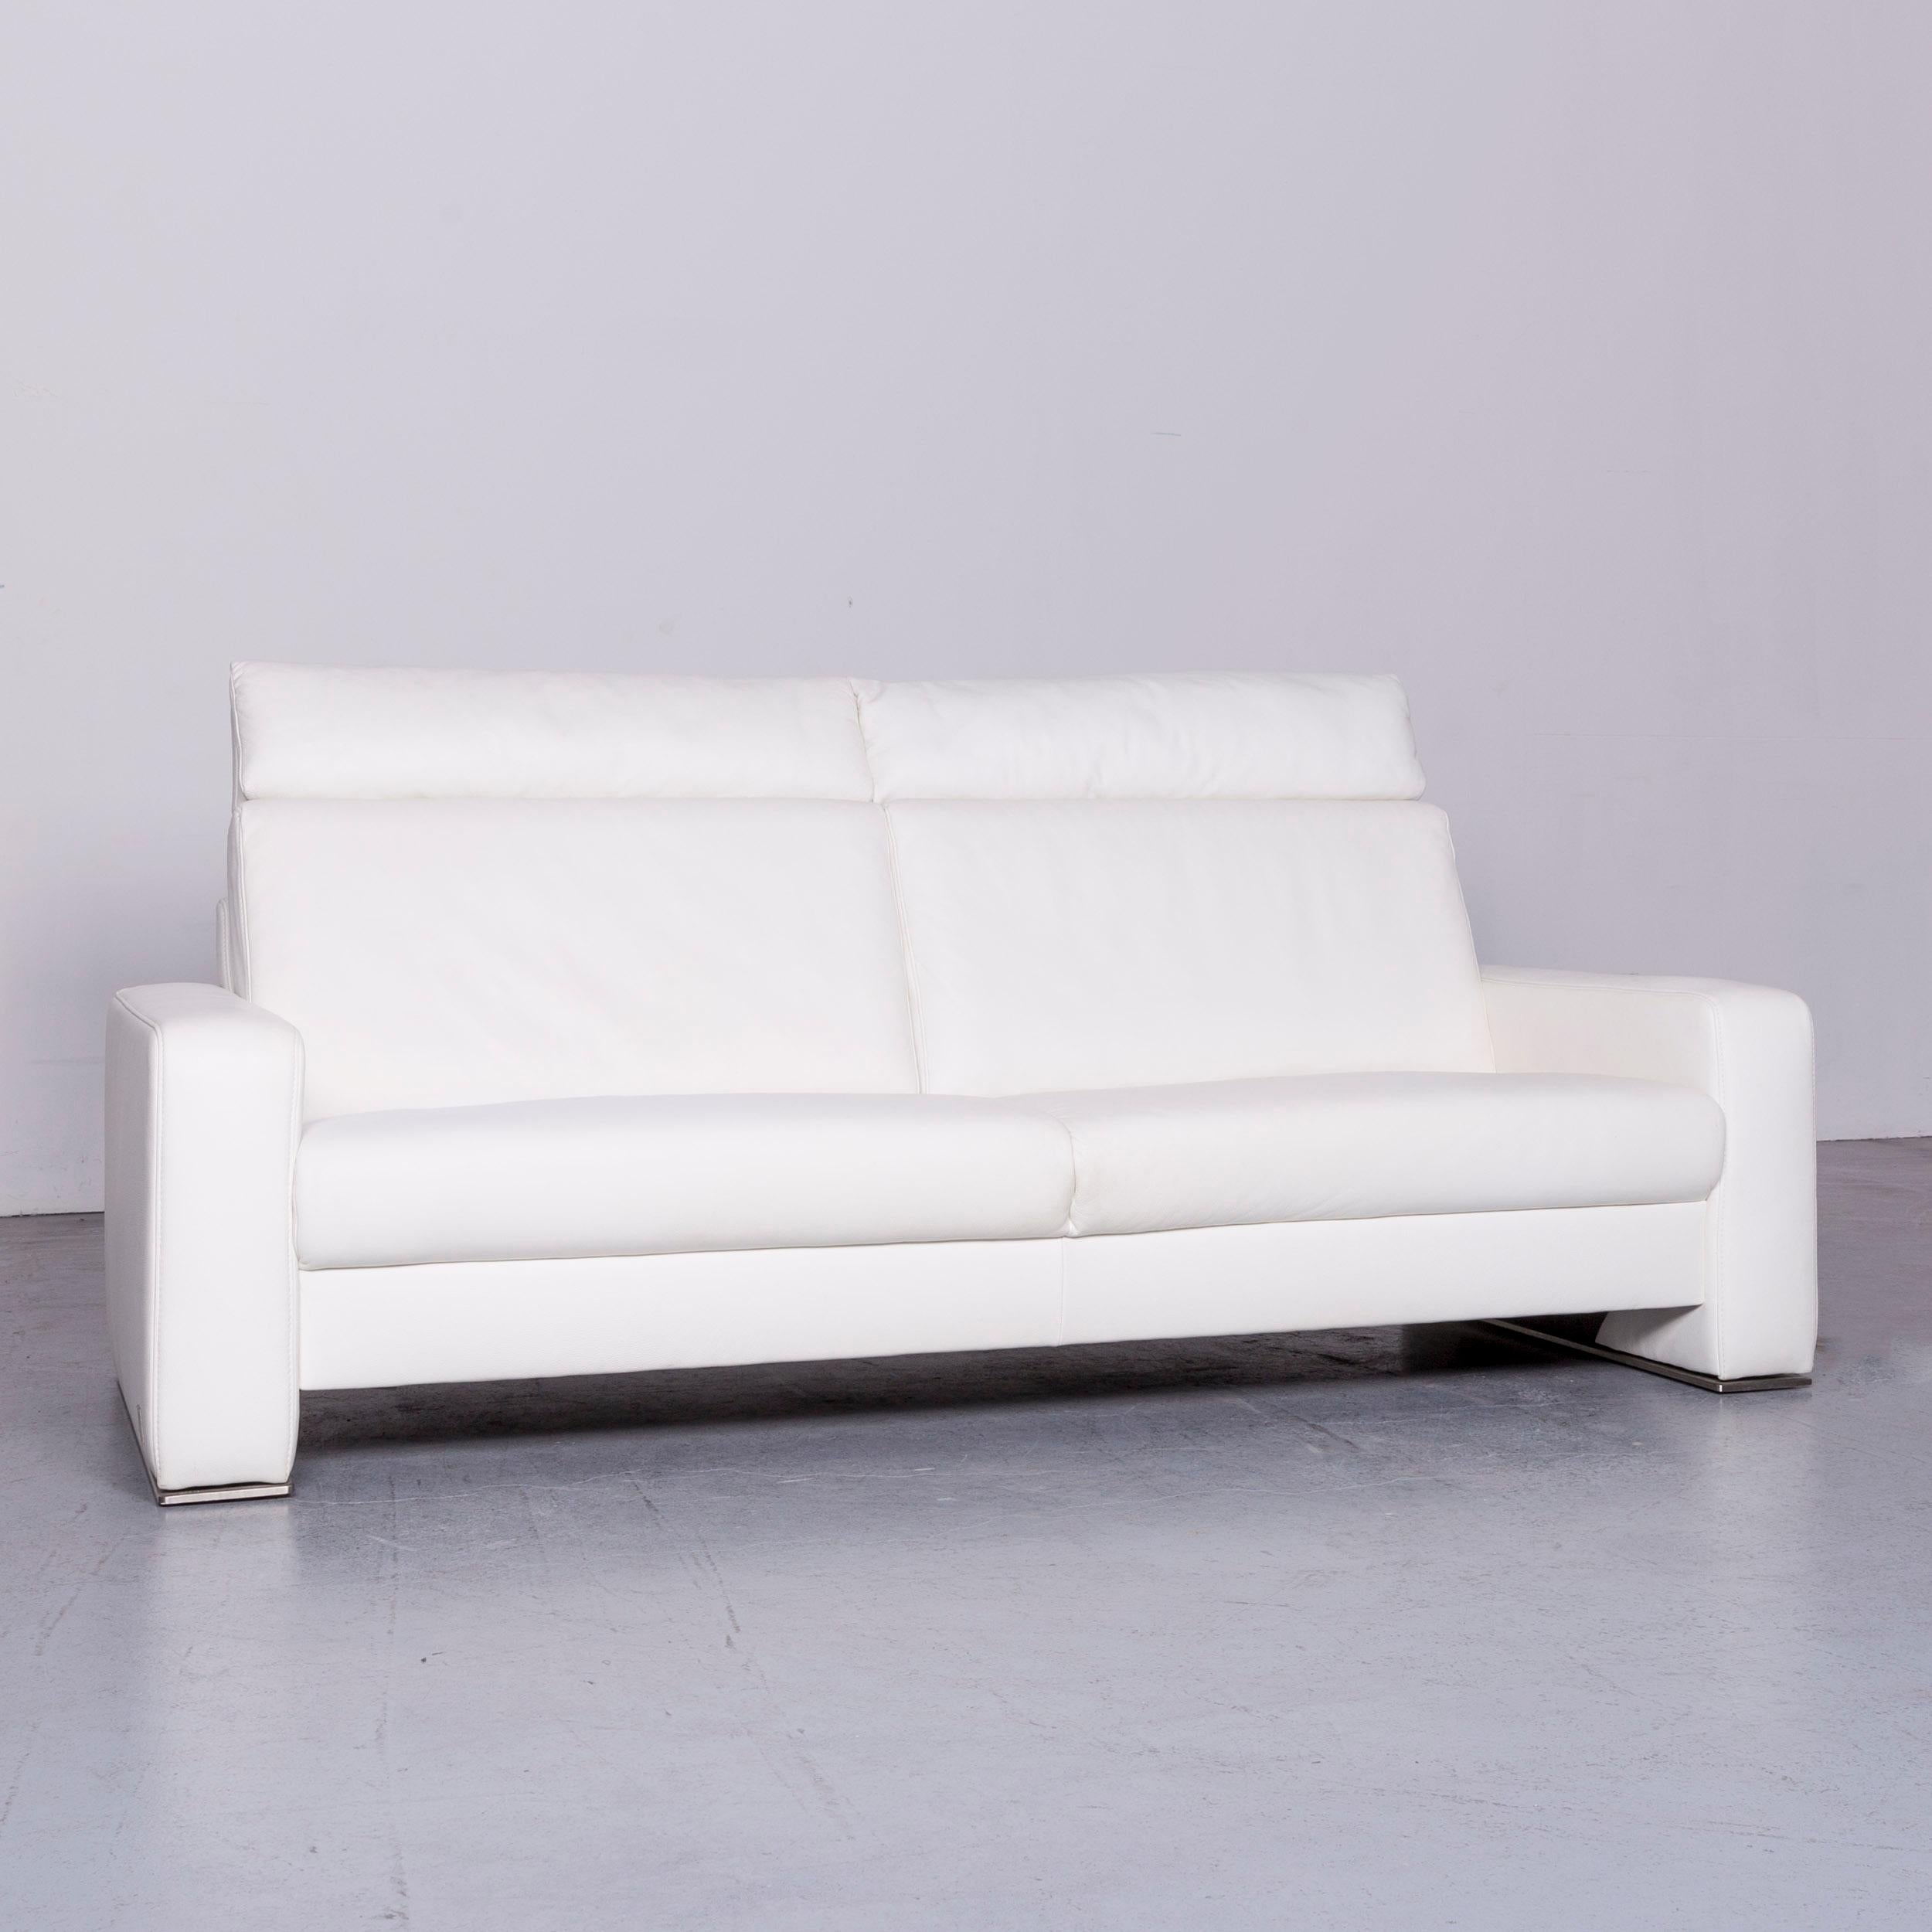 We bring to you a Joop! designer leather sofa white three-seat couch.